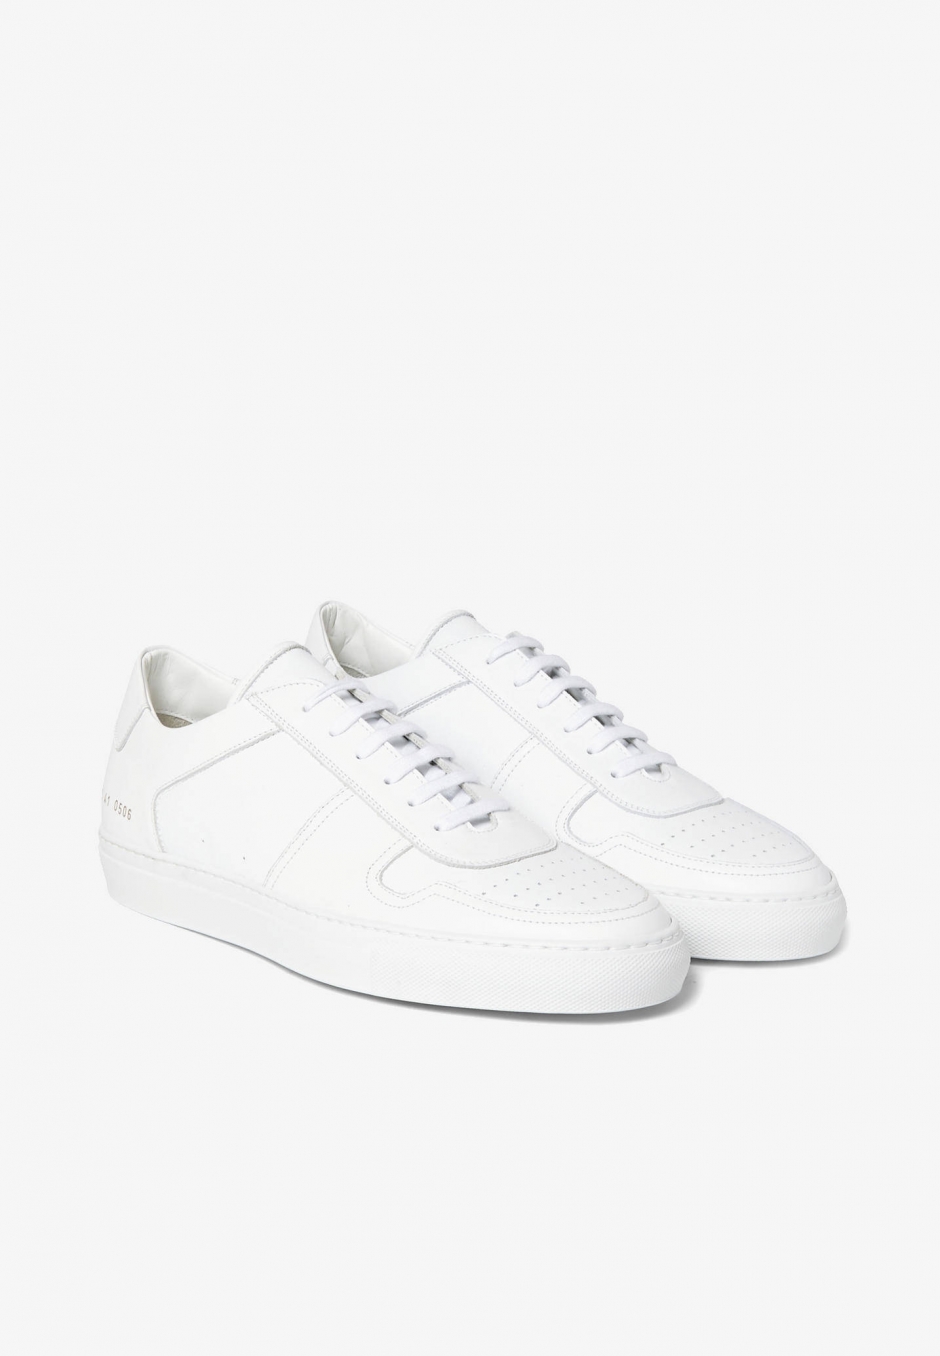 Common Projects Bball Low Leather White